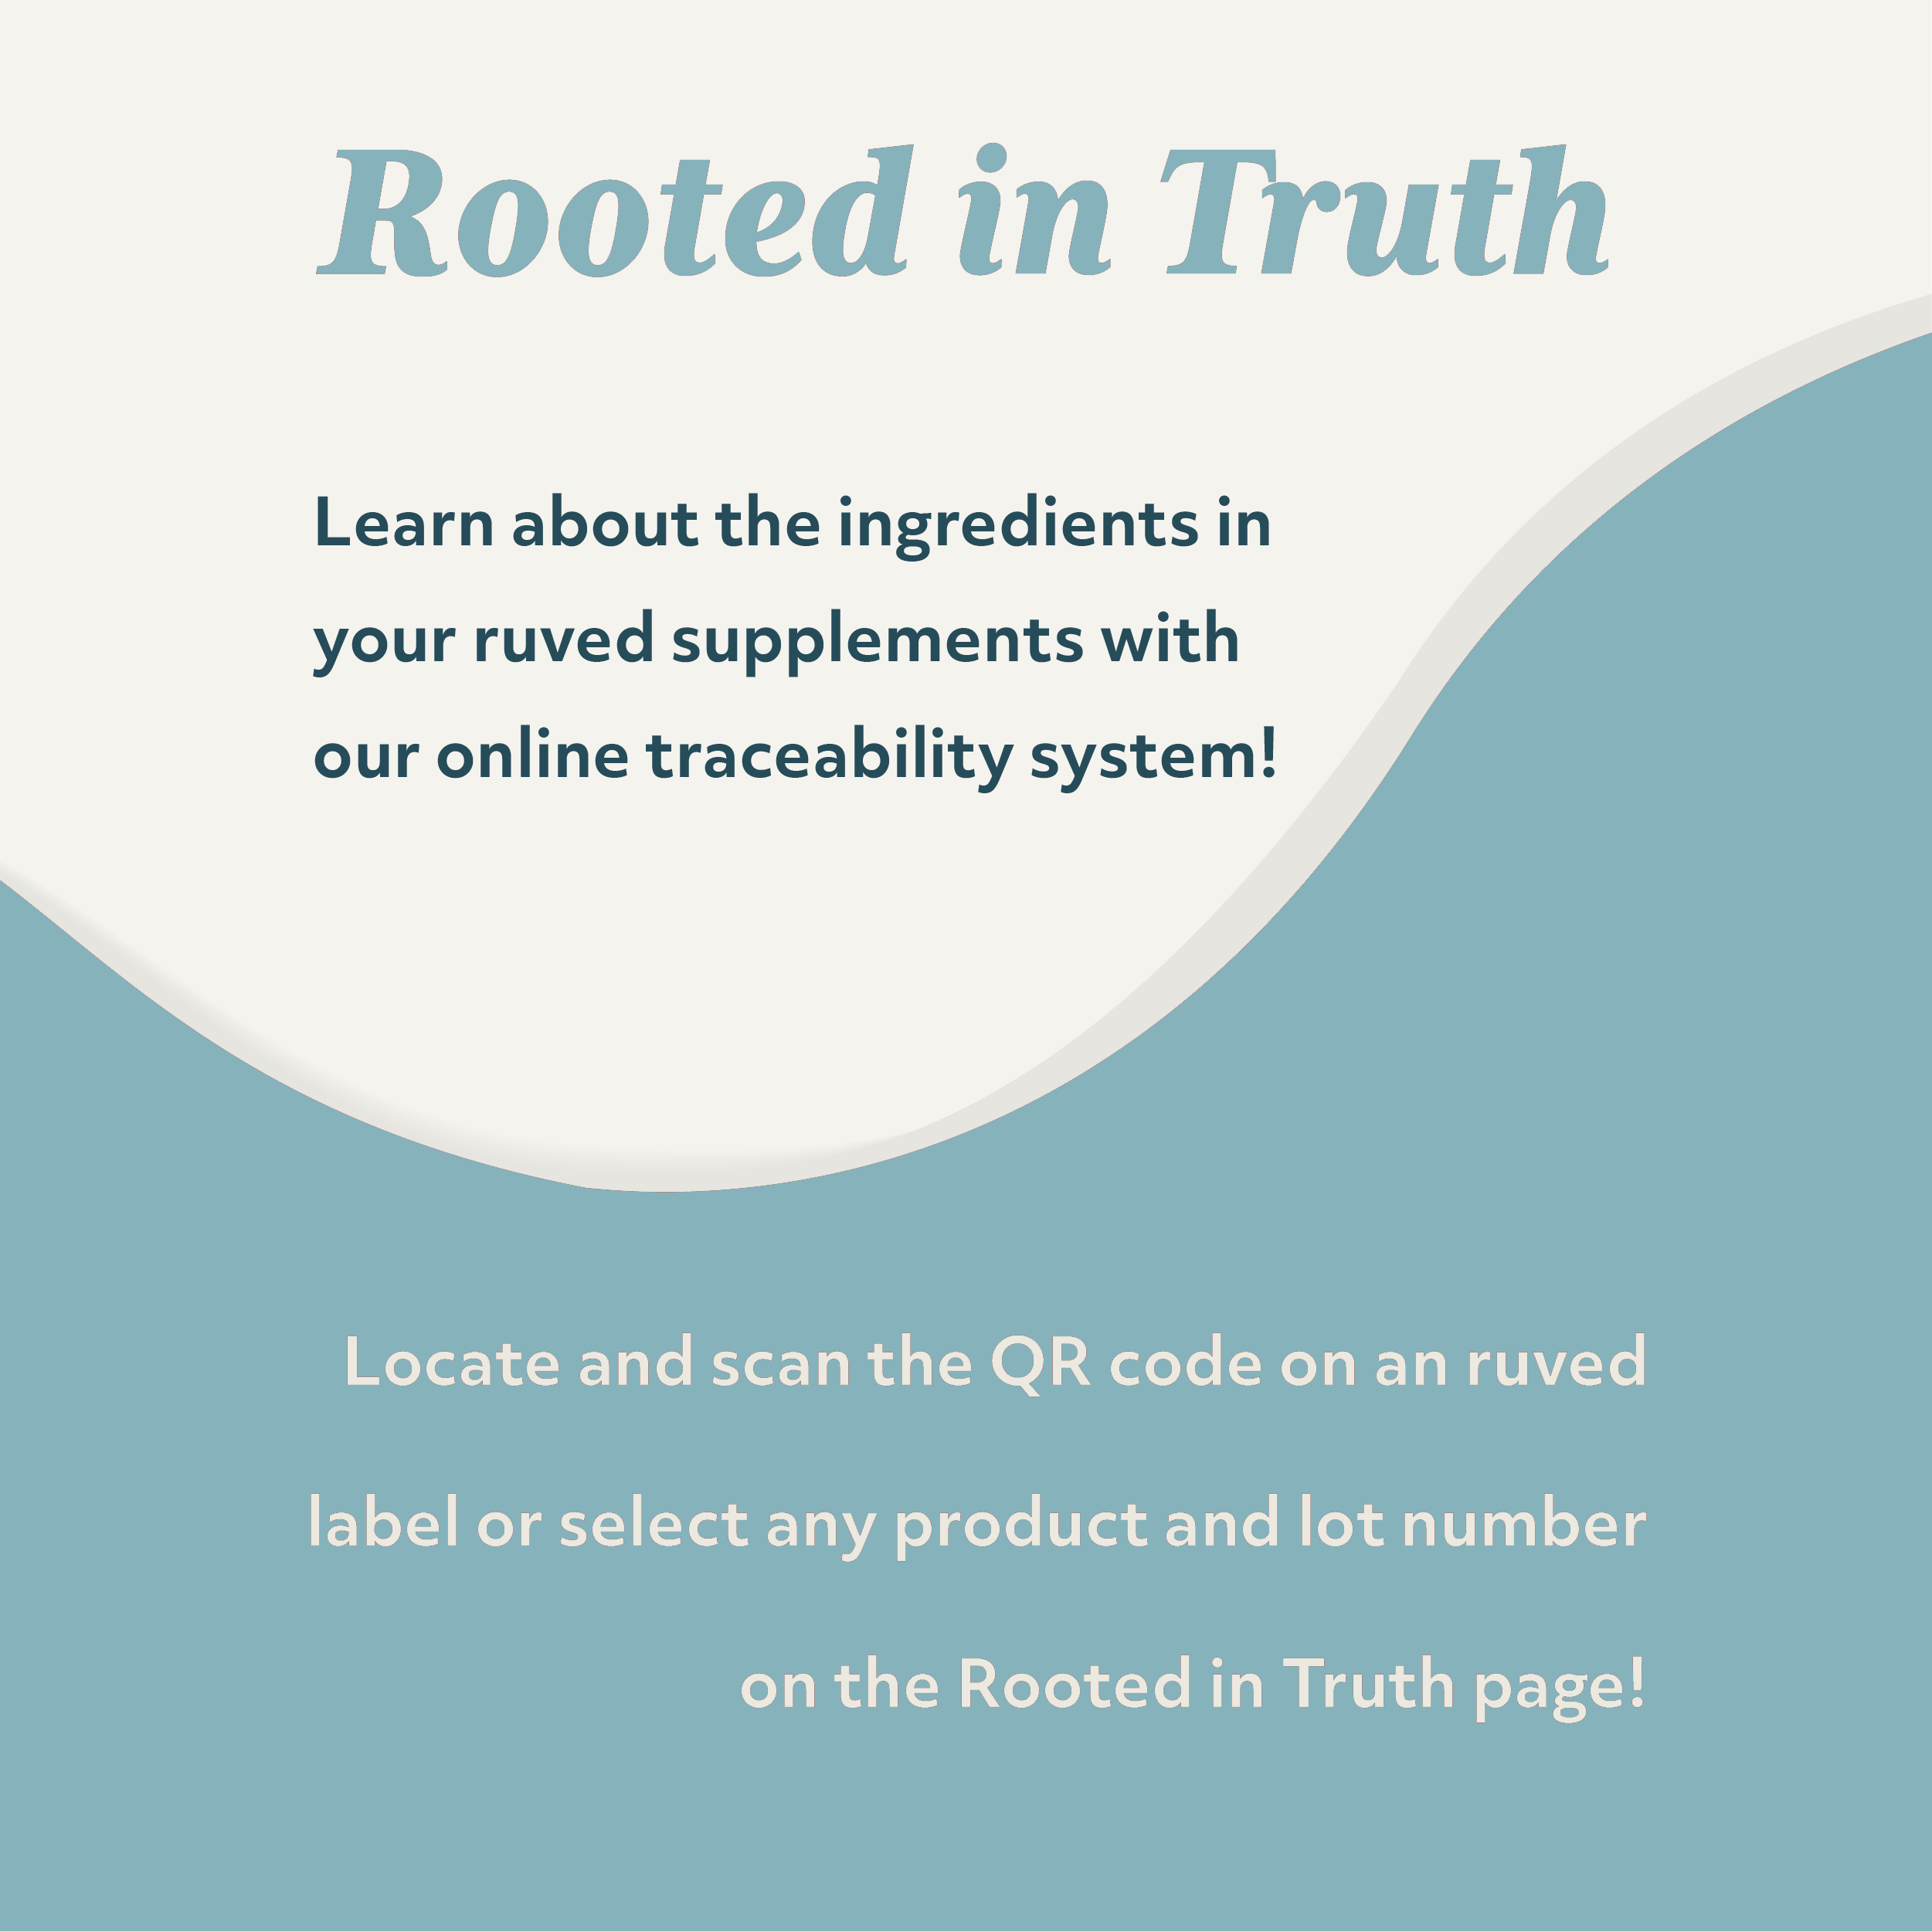 Rooted in Truth, learn about the ingredients in your ruved supplements with our online traceability system. Scan the QR code on your label, or select any product and lot number on the Rooted in Truth webpage!